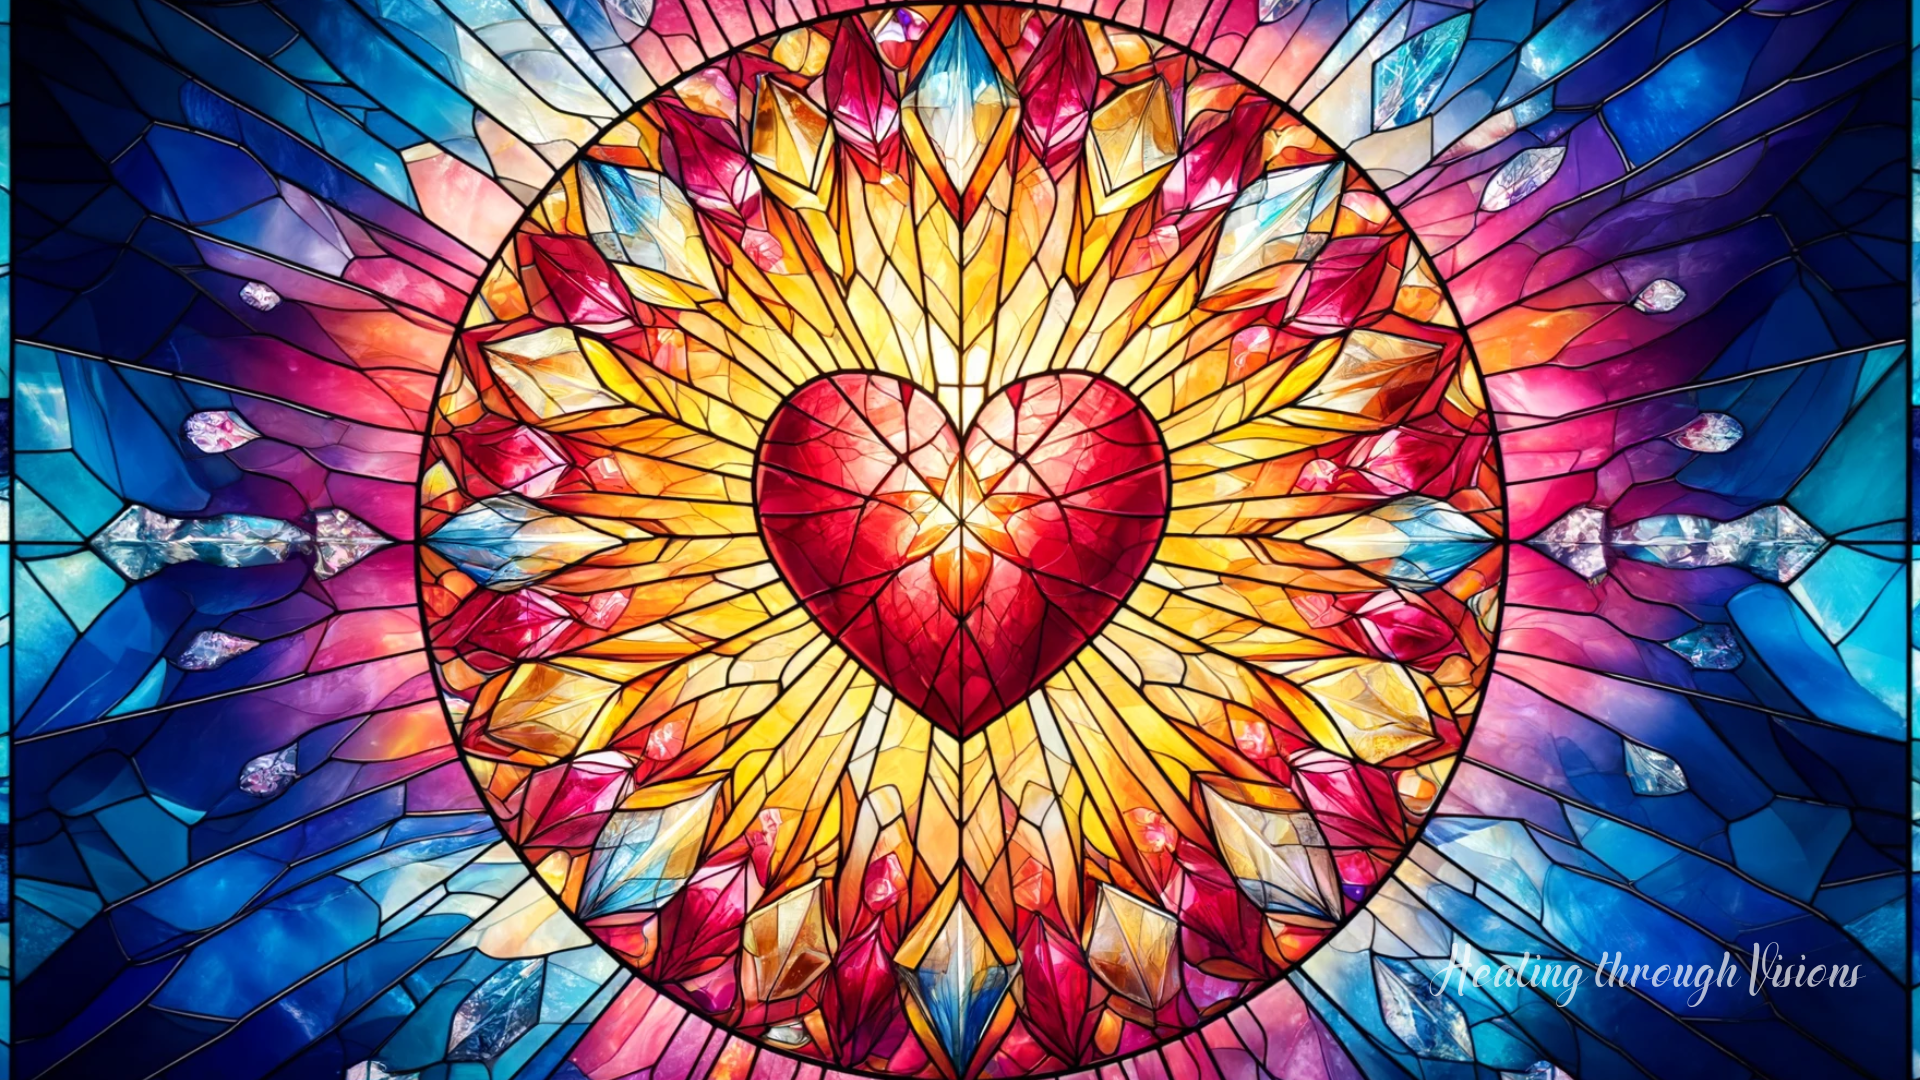 A stained glass artwork featuring an open heart surrounded by clear, crystalline patterns against a vibrant background. The heart represents openness and clarity, visualizing the mantra My heart is open, my mind is clear.